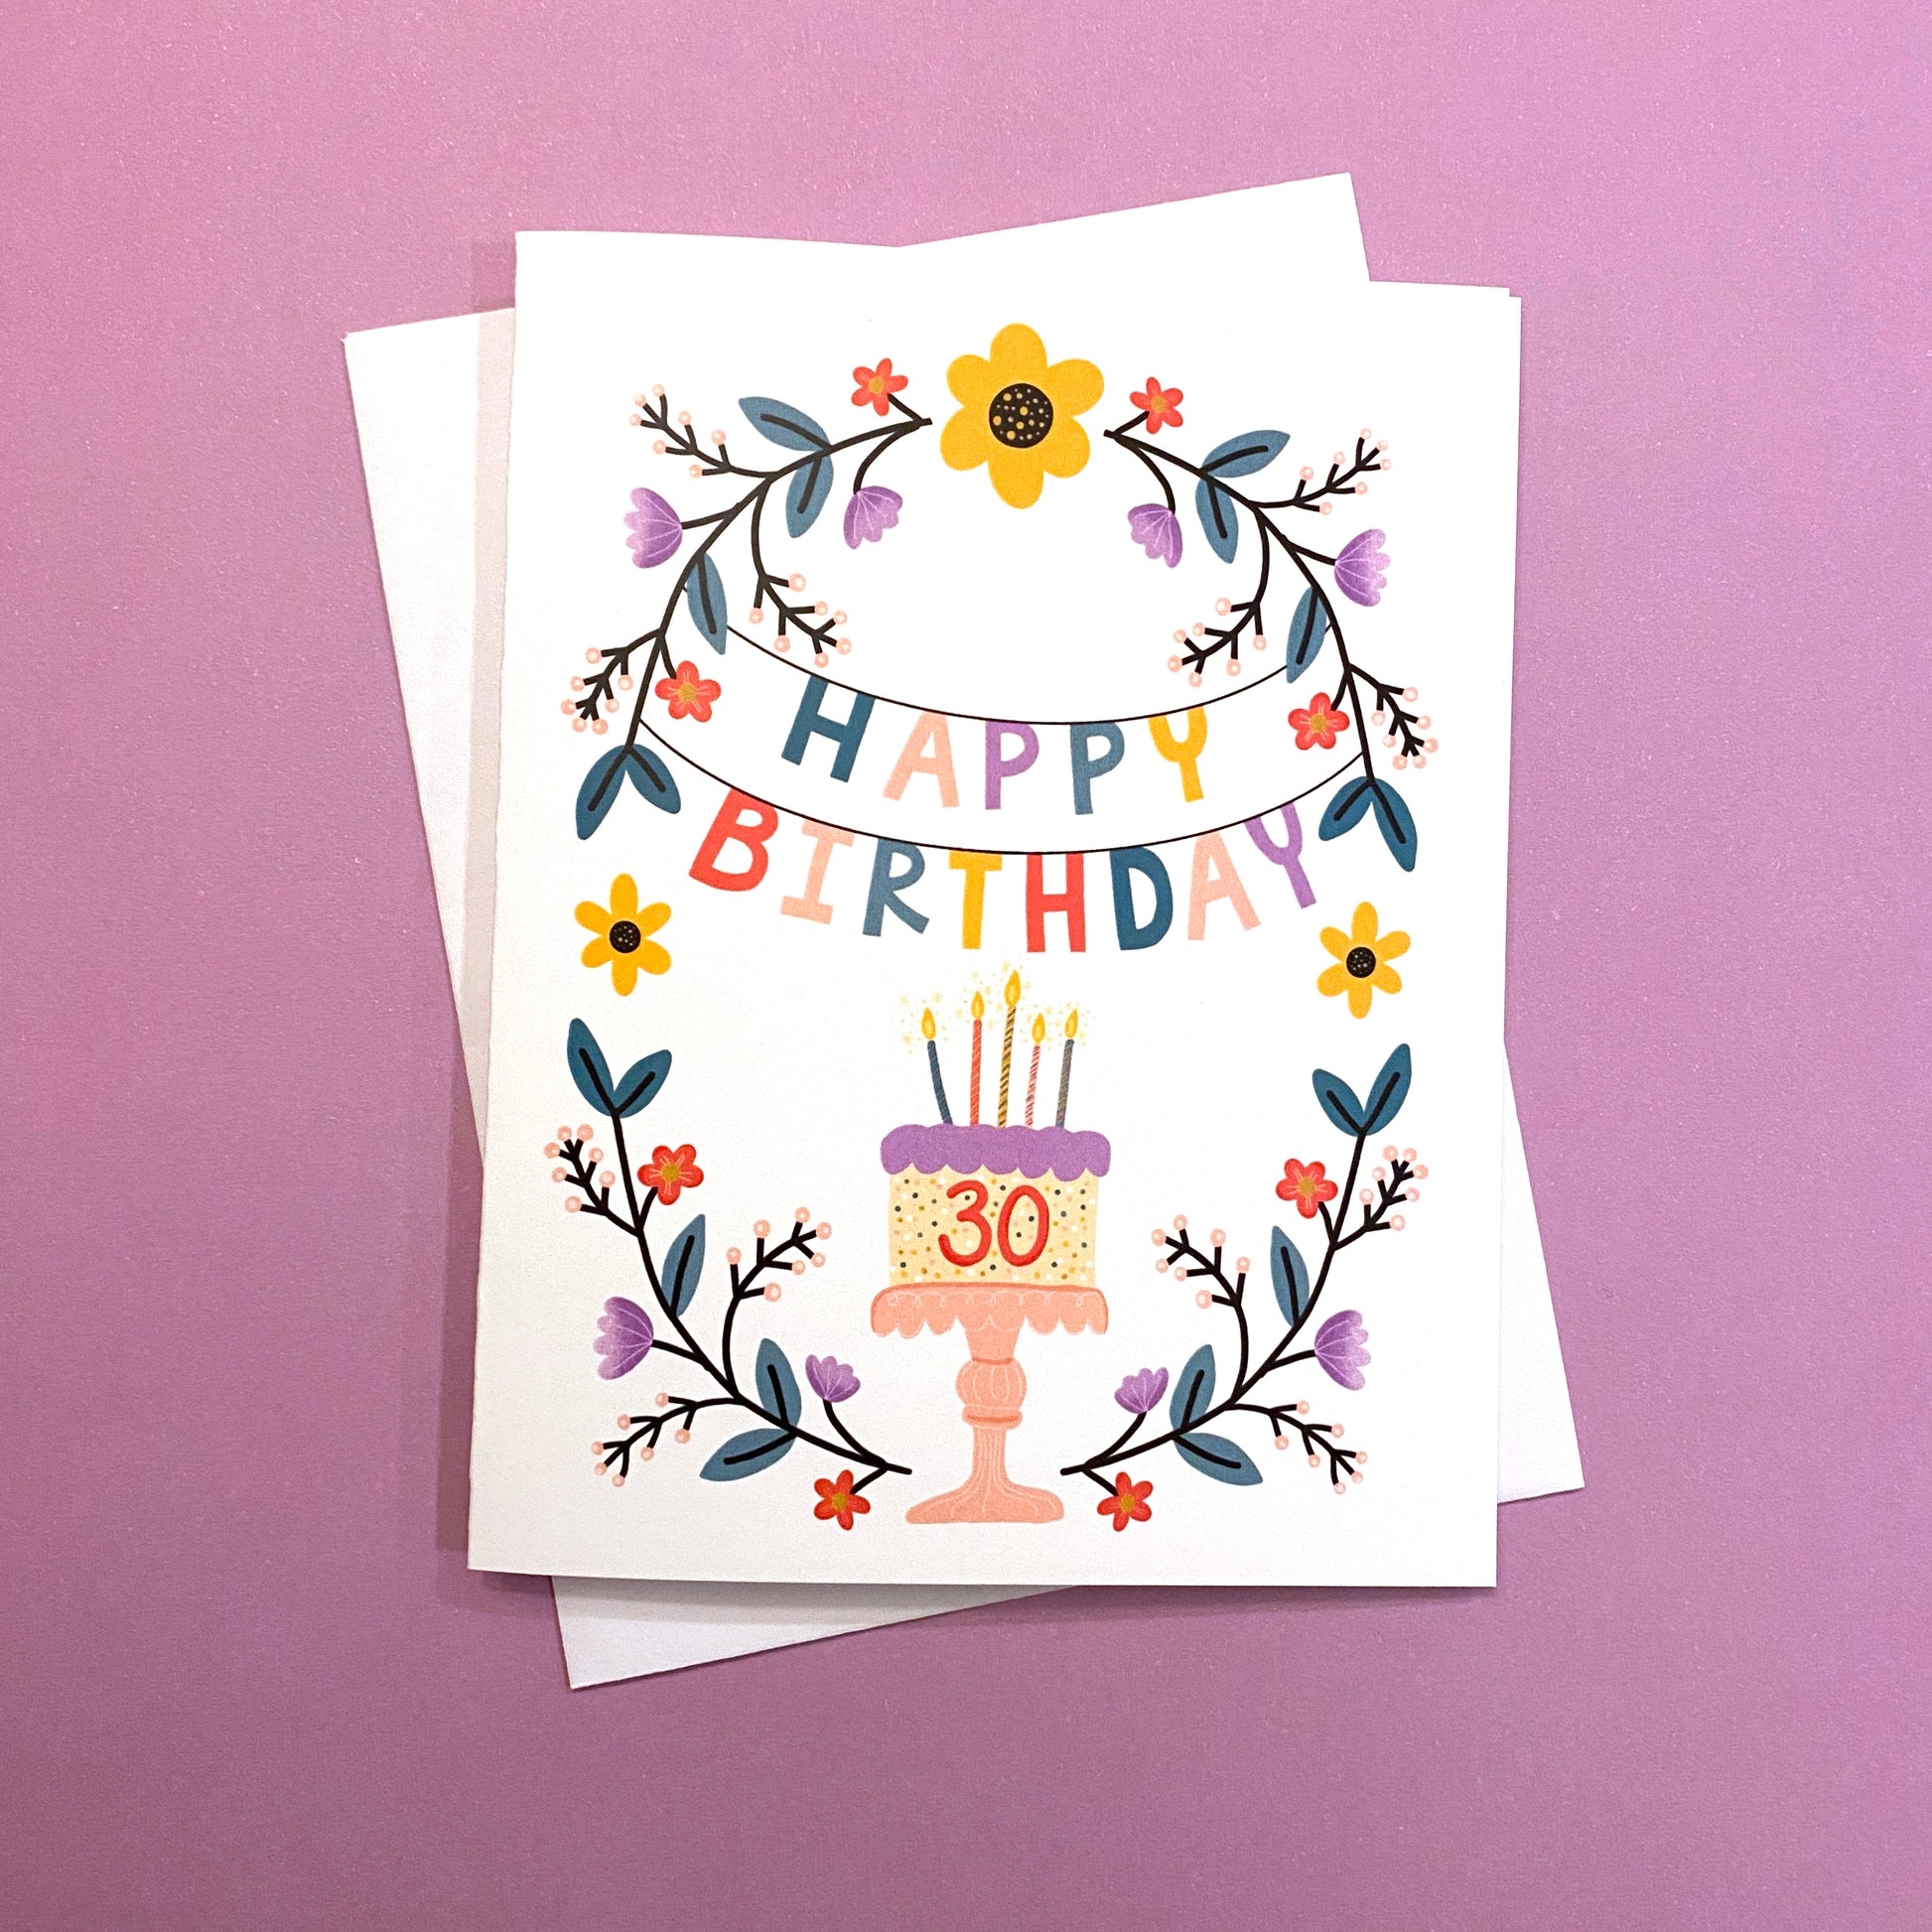 30th birthday greeting card with flowers and cake.